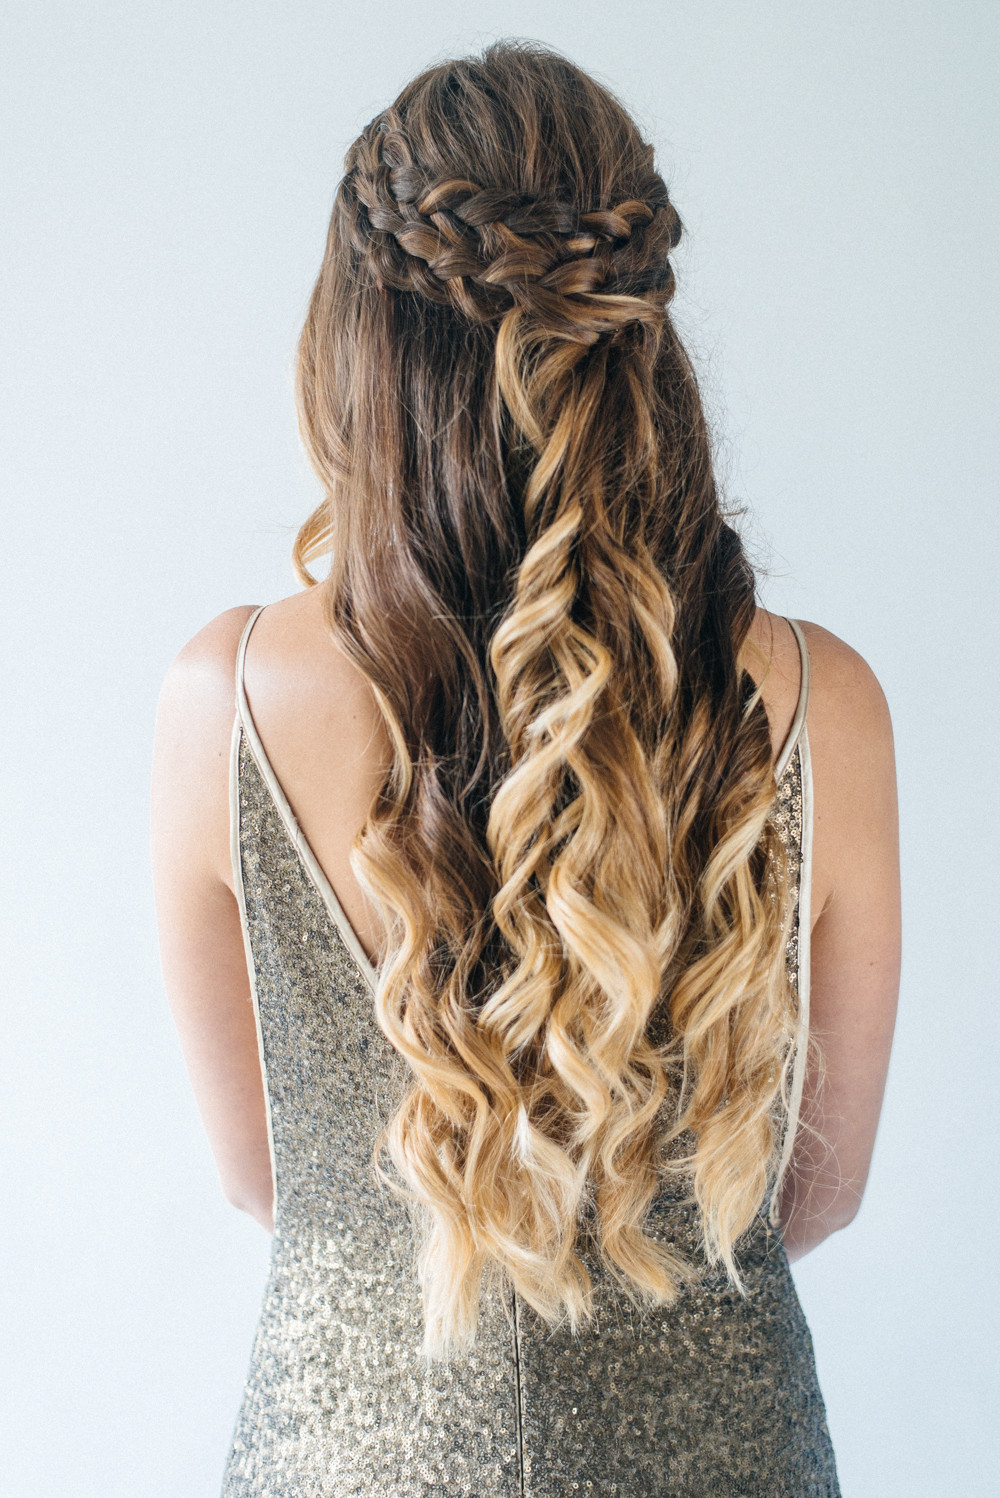 Long Down Wedding Hairstyles
 Inspiration For Half Up Half Down Wedding Hair With